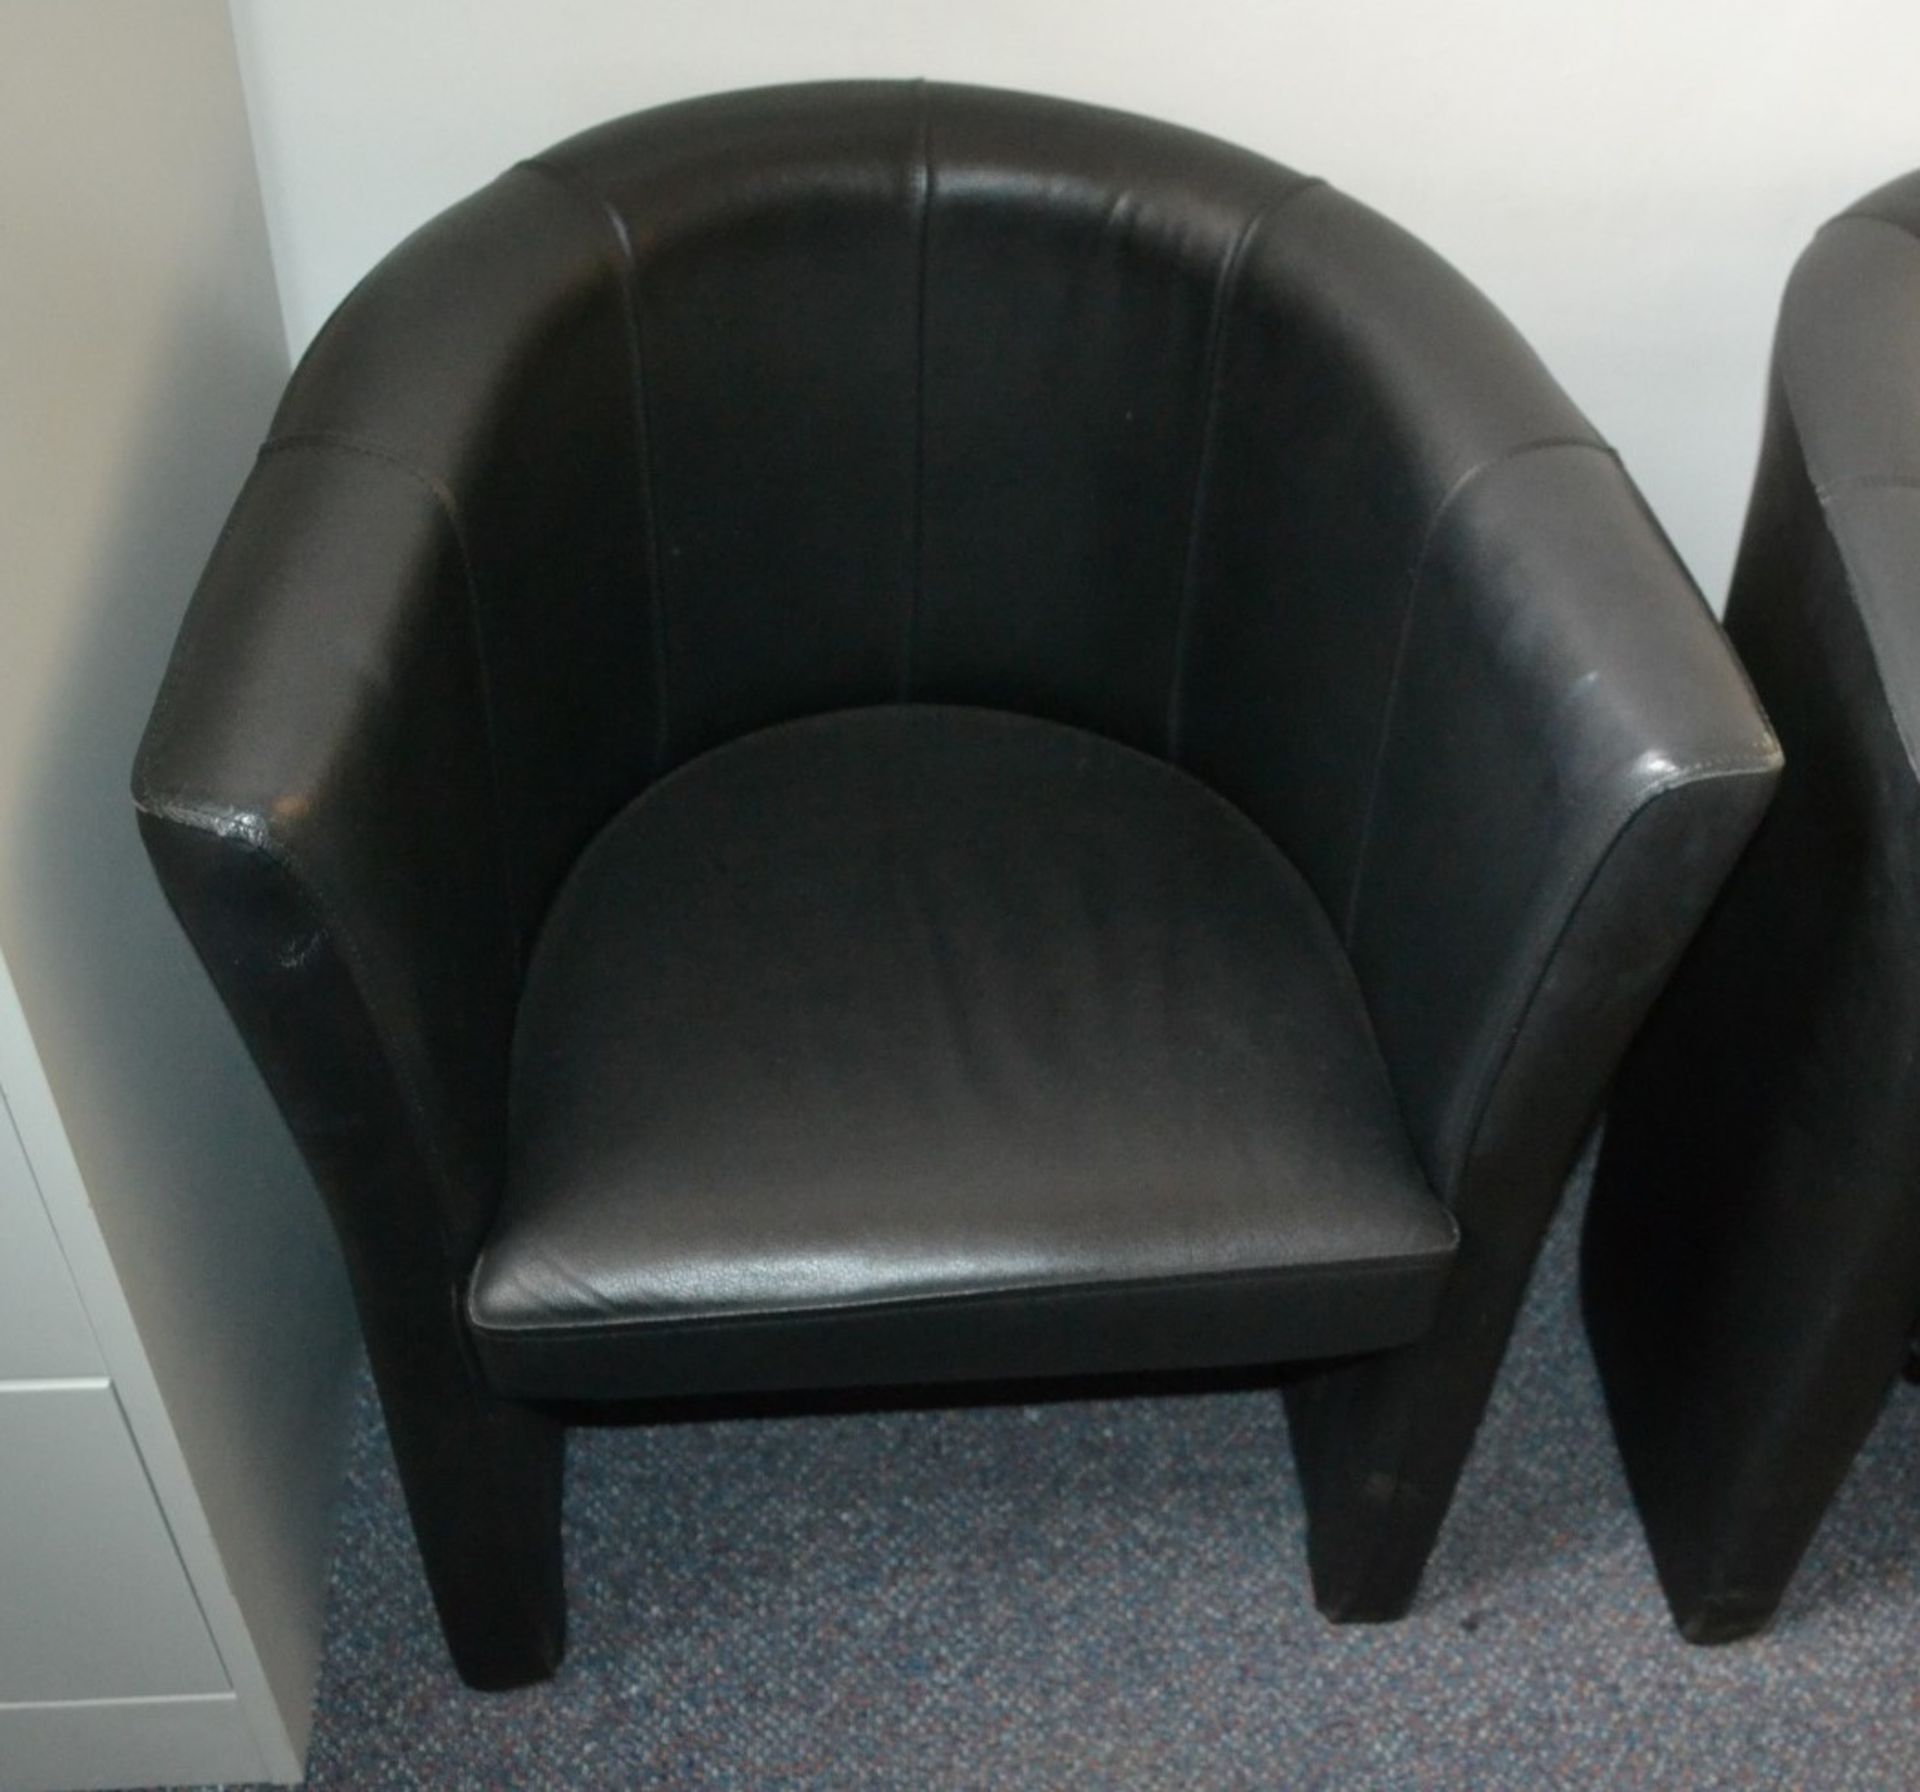 3 x Faux Leather Tub Chairs In Black - In Good Overall Condition - Ref BB1184 KS - Image 2 of 3